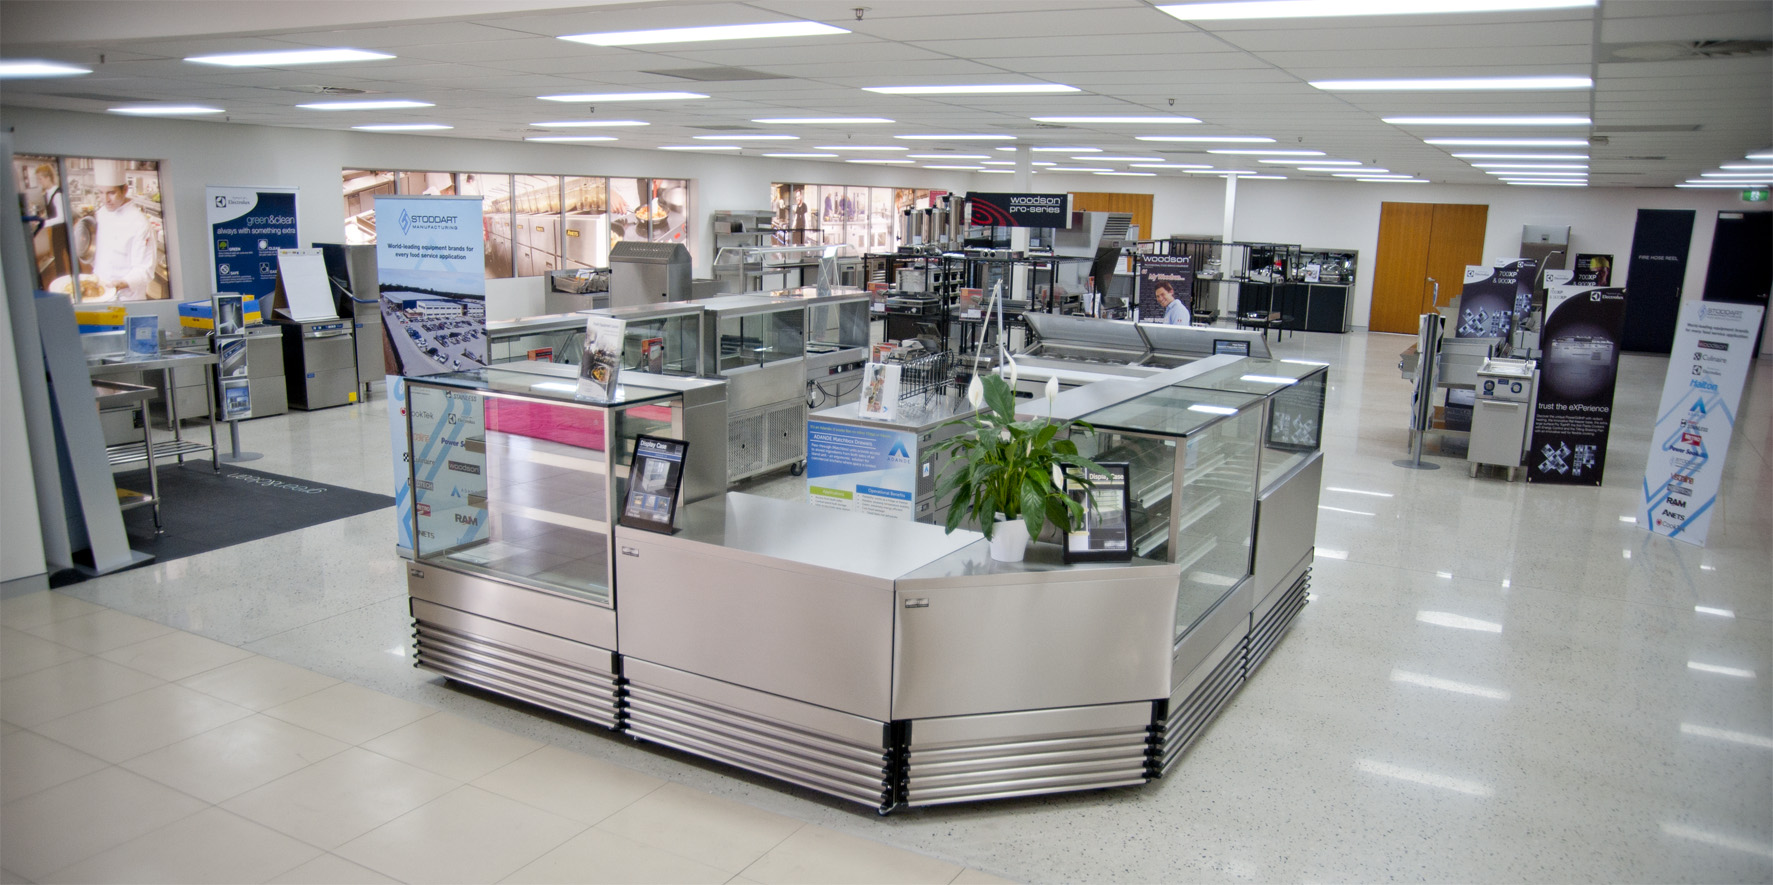 Commercial kitchen equipment sits in the middle of a showroom